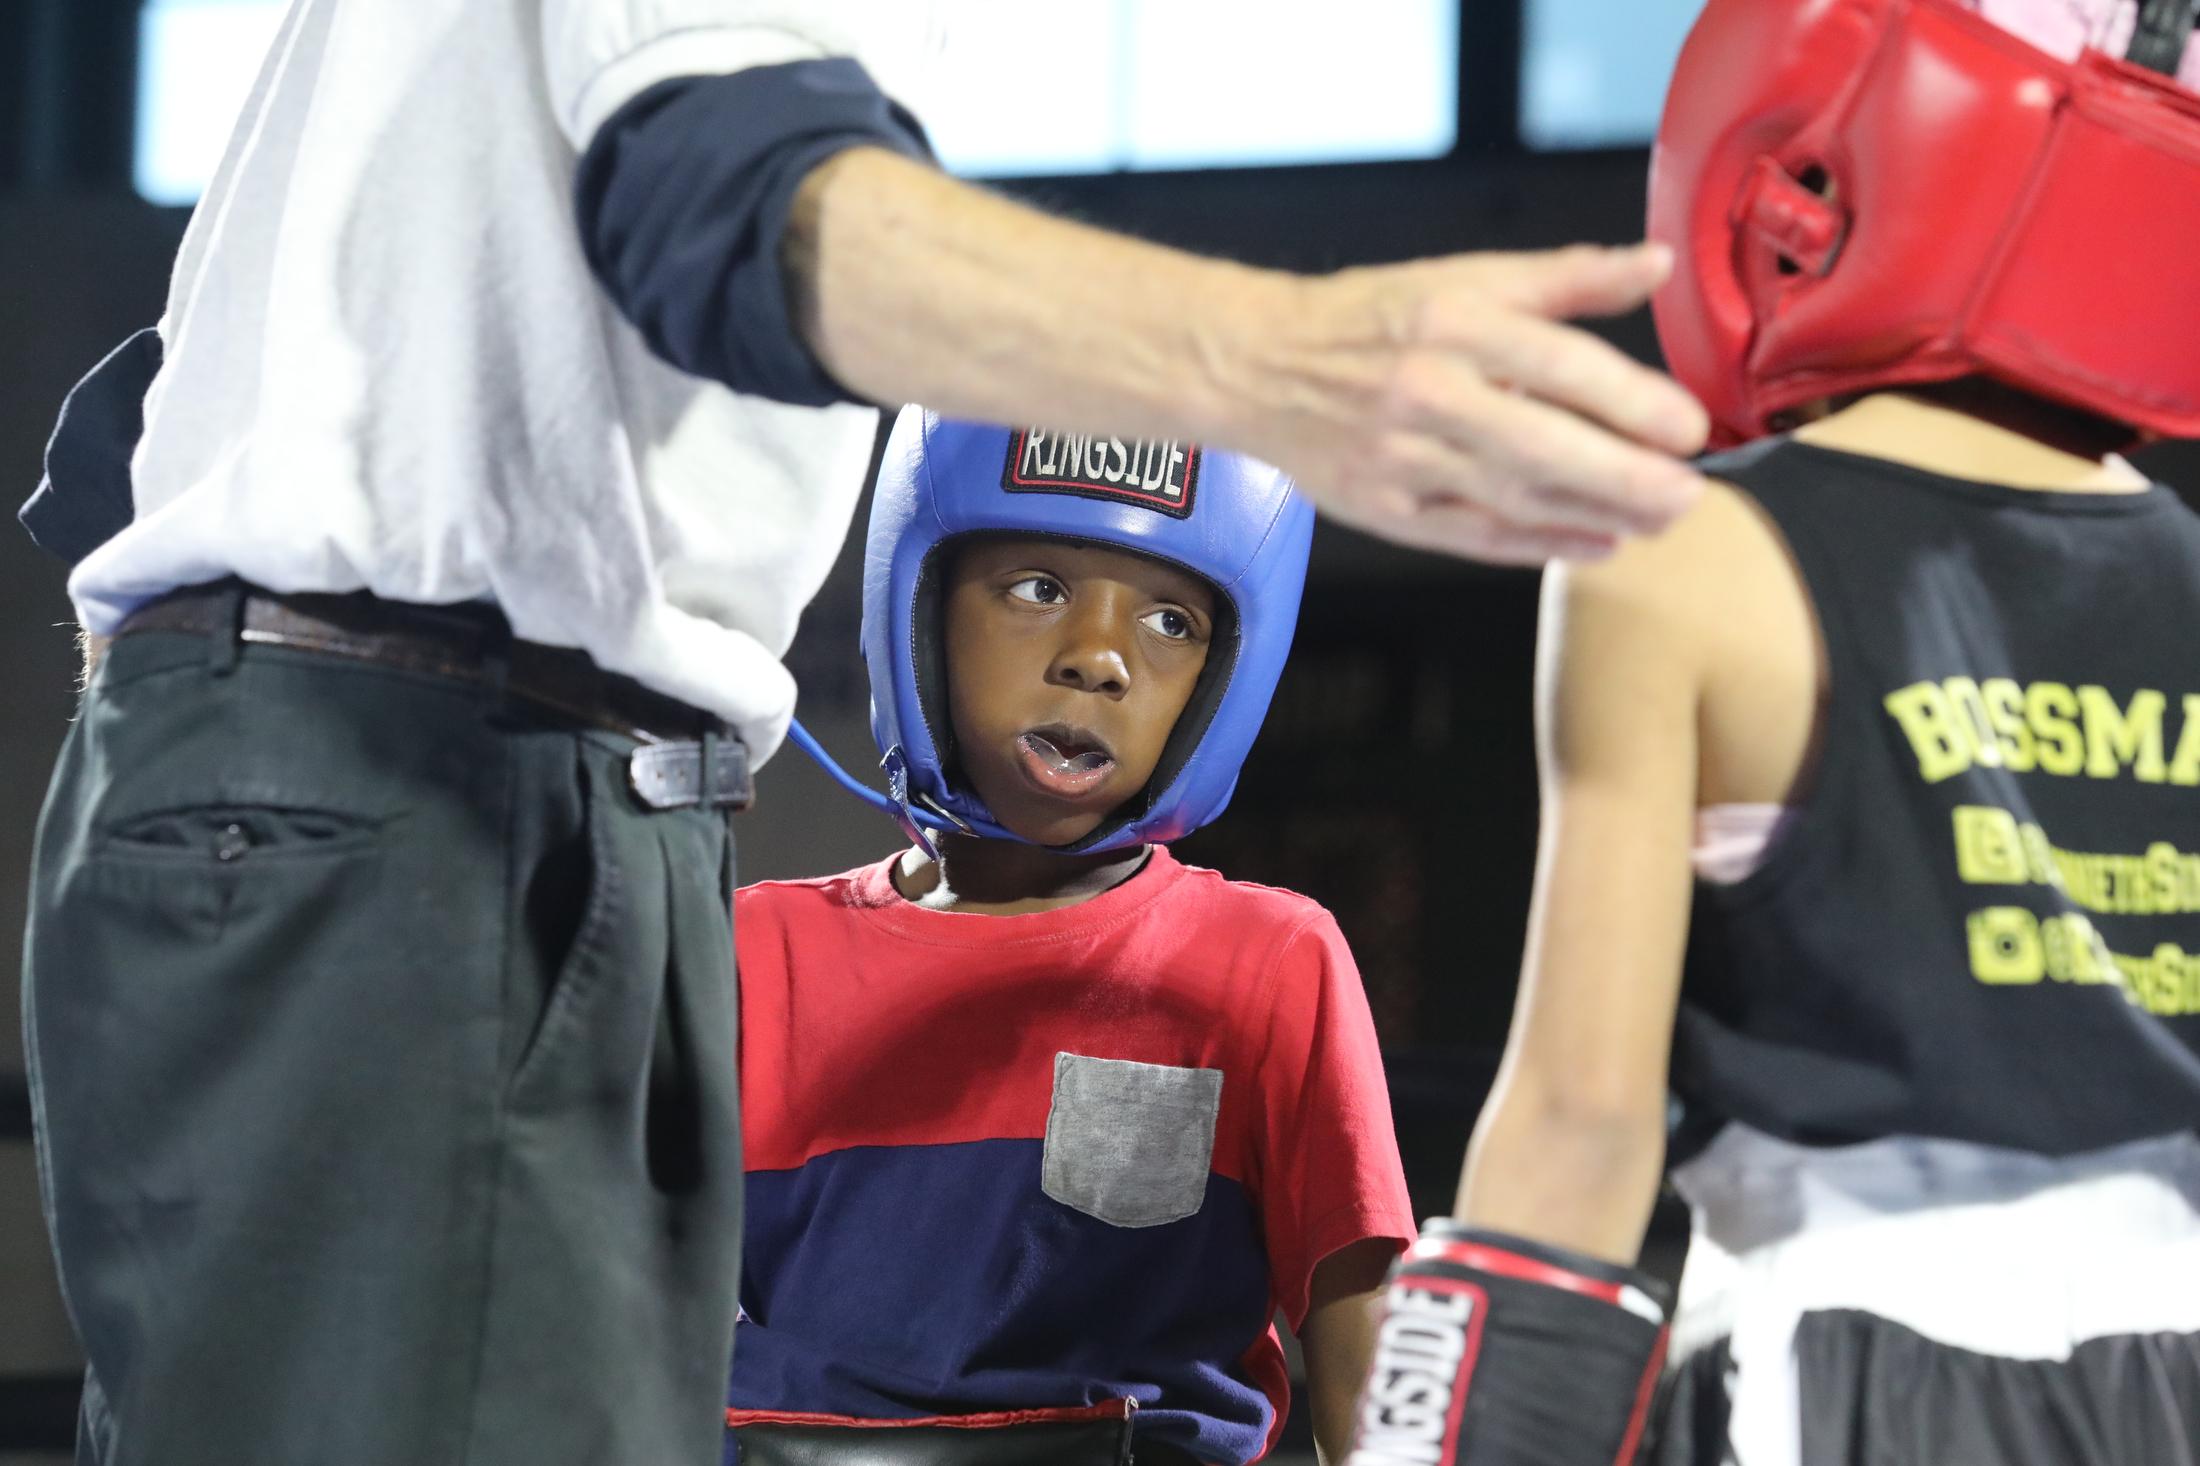 10 years in a boxing gym - Jadonis in the ring at Harrisson Park boxing tournament